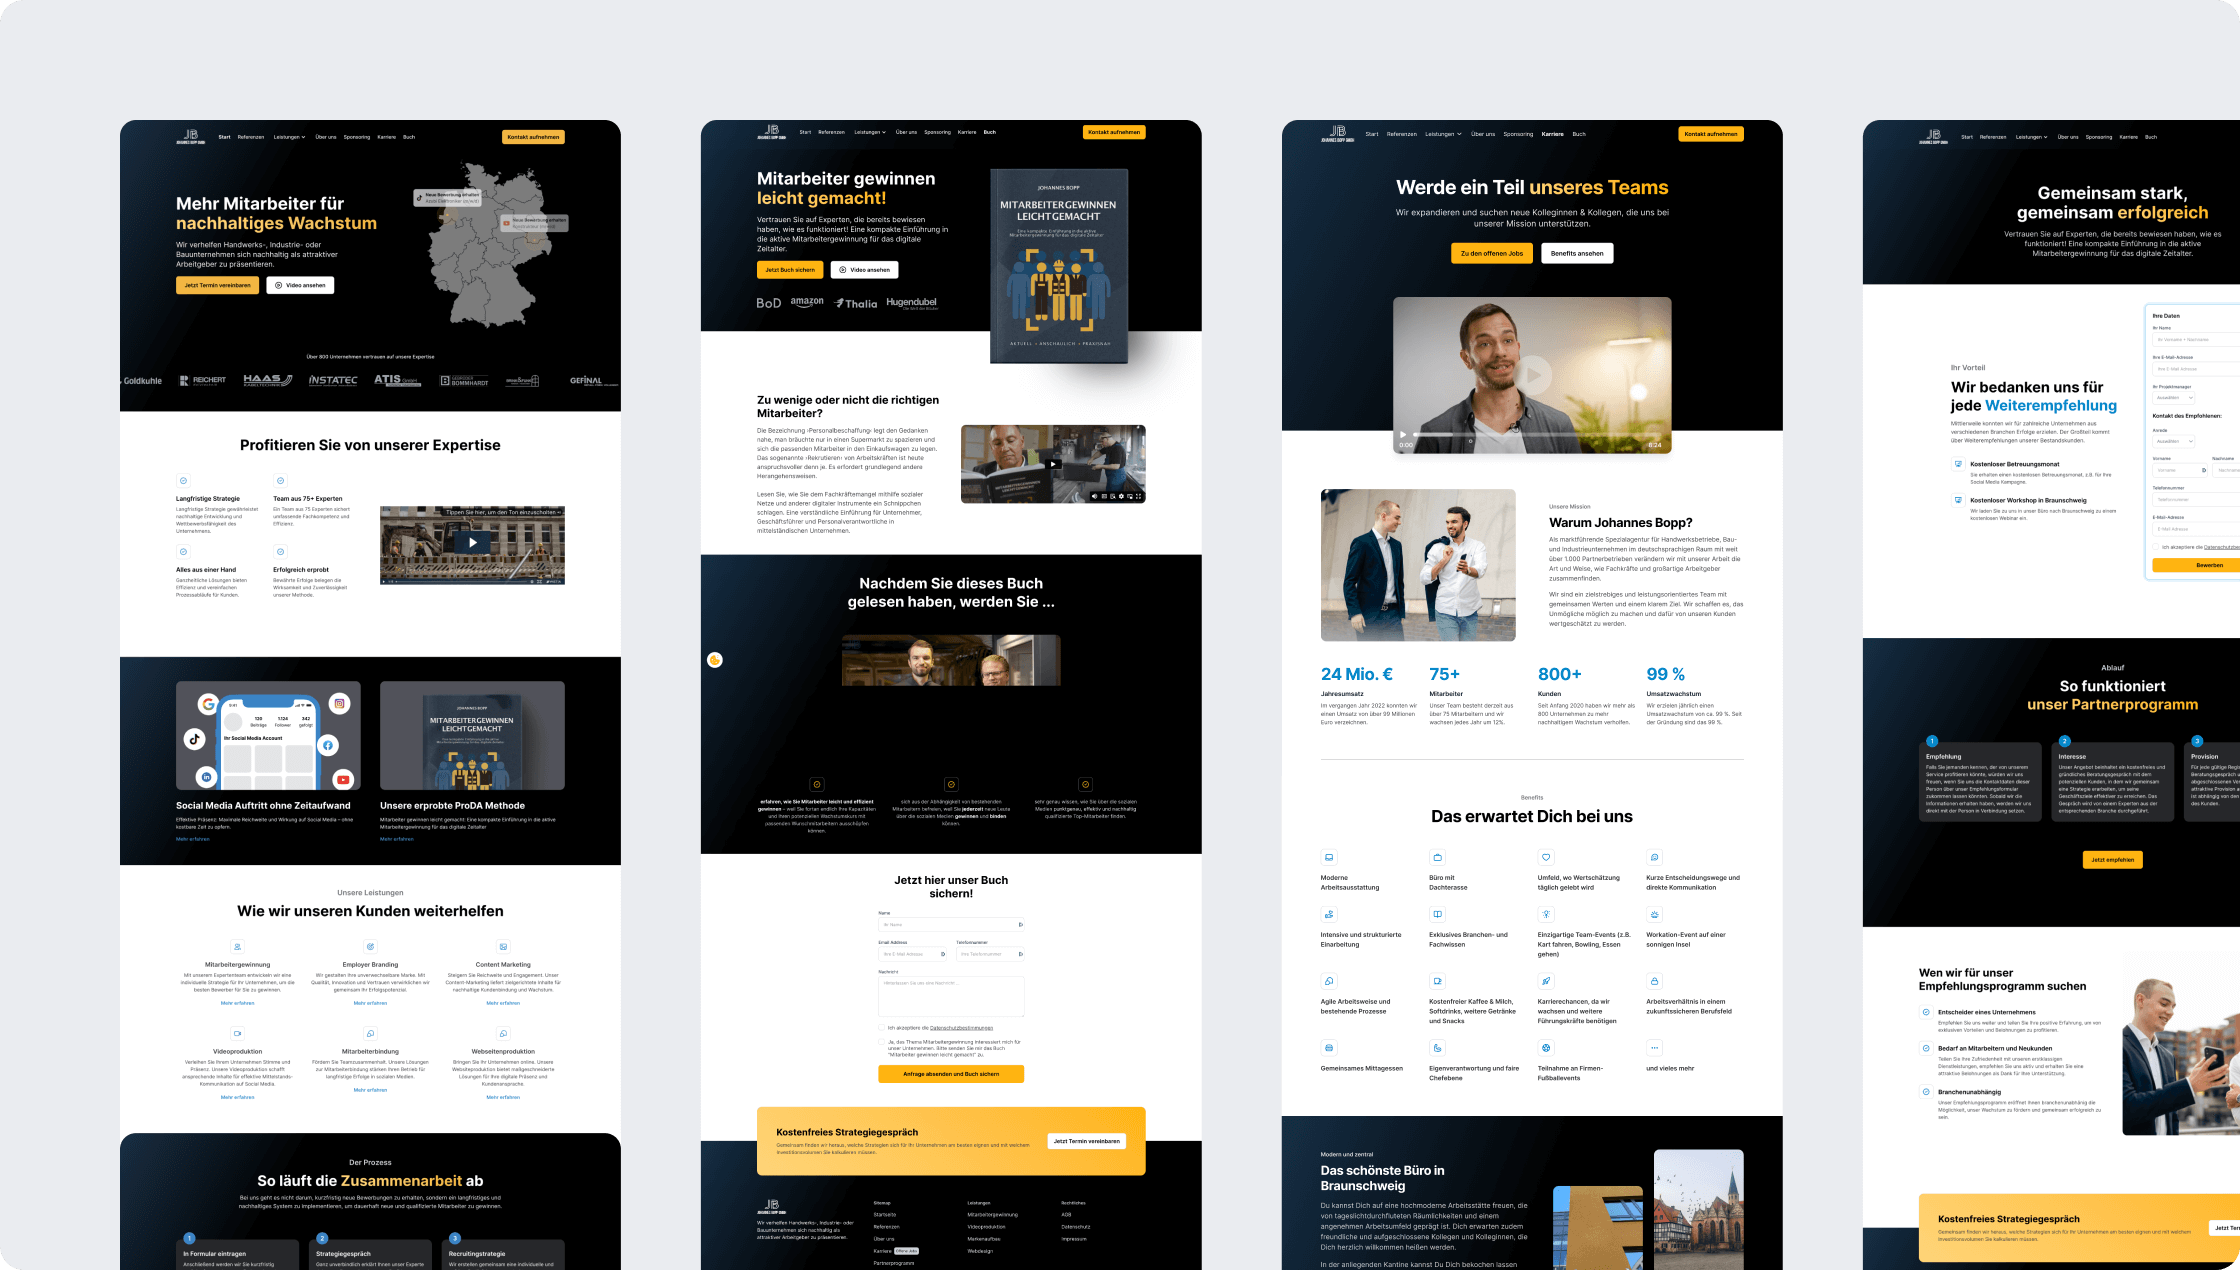 Overview of the individually designed sub-pages